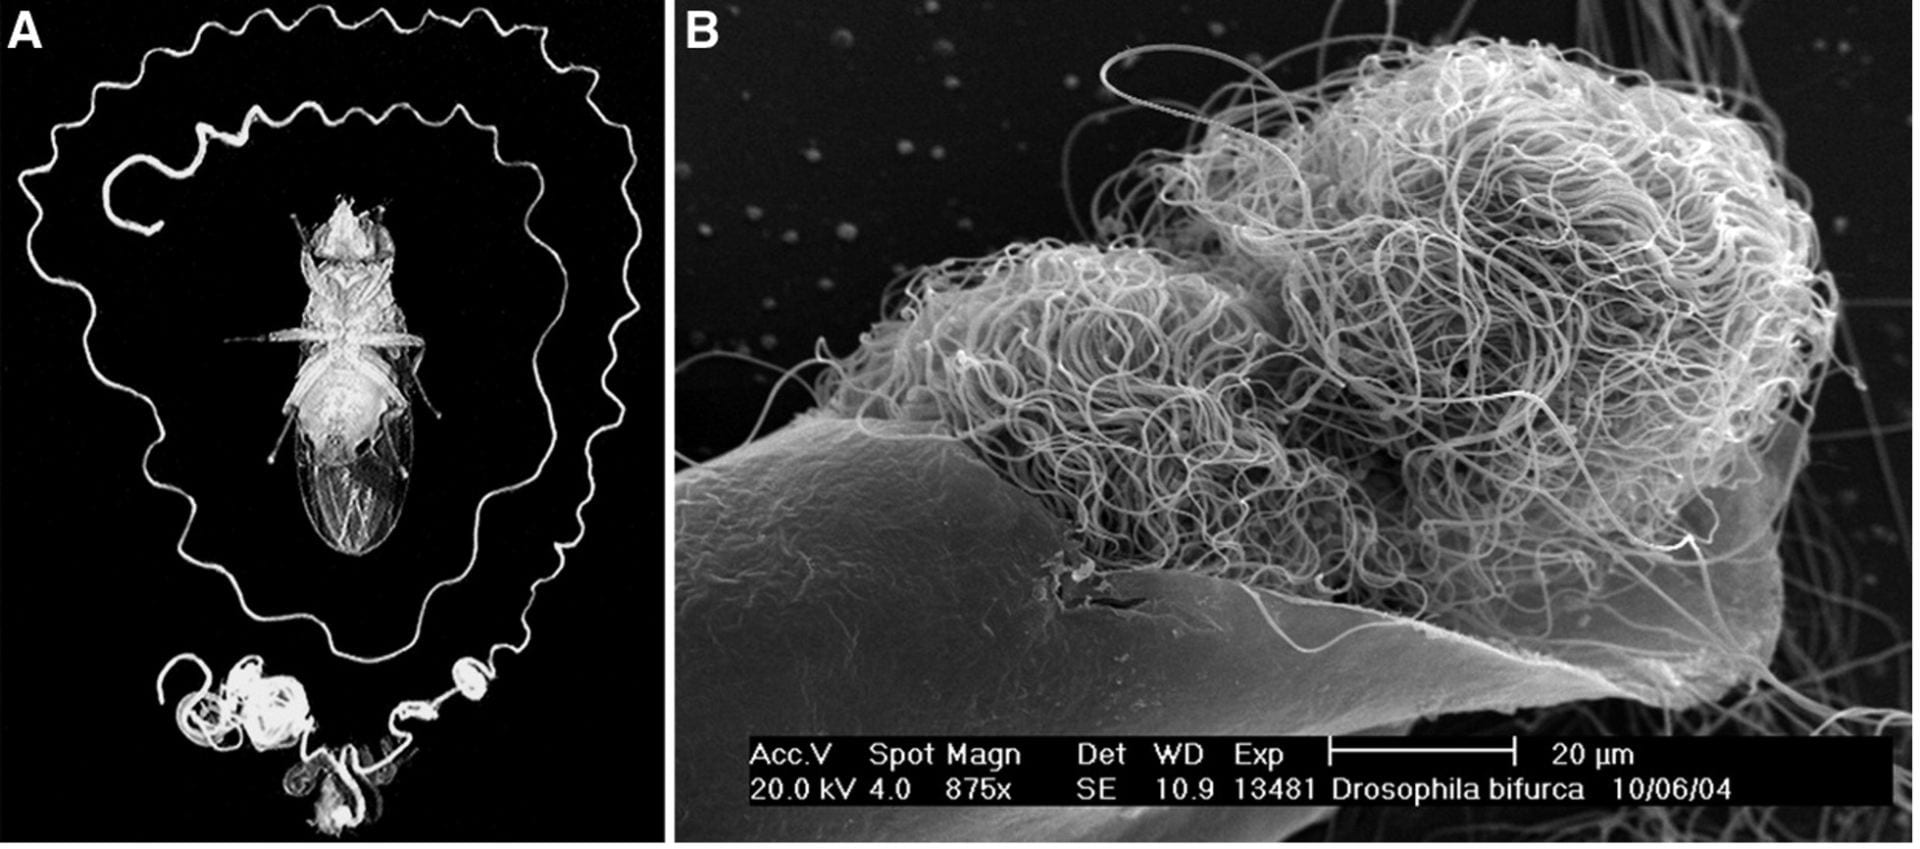 On the left, a photo of Drosophila bifurca with its long dissected testis unfurling around its body multiple times (photo by Scott Pitnick). On the right, two large D. bifurca sperm cells are coiled up tightly into balls within a male’s testis (photo by Romano Dallai).